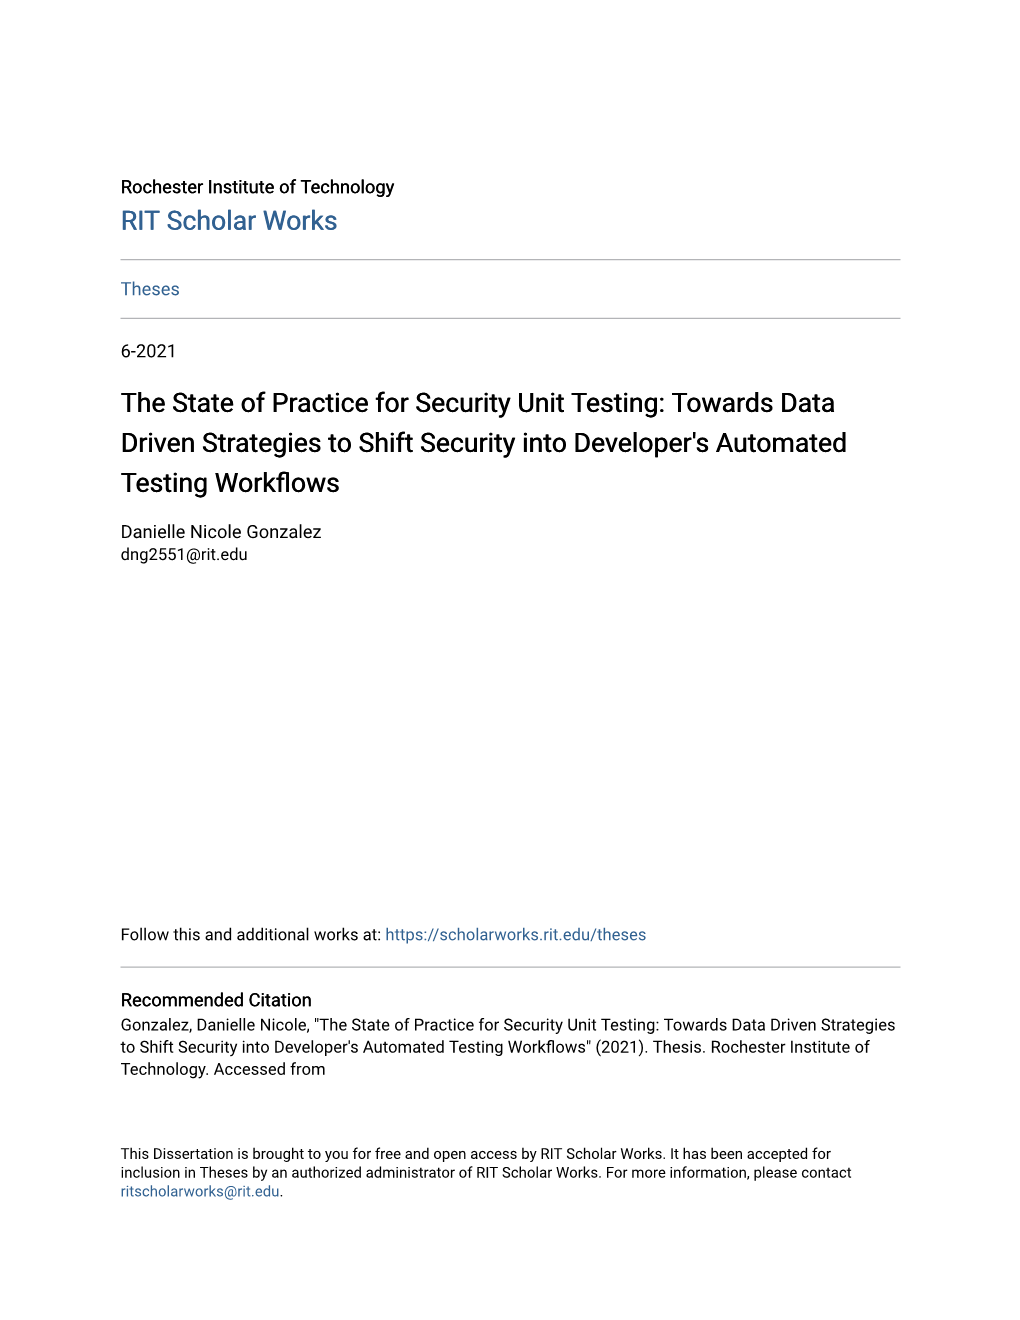 The State of Practice for Security Unit Testing: Towards Data Driven Strategies to Shift Security Into Developer's Automated Testing Workflows